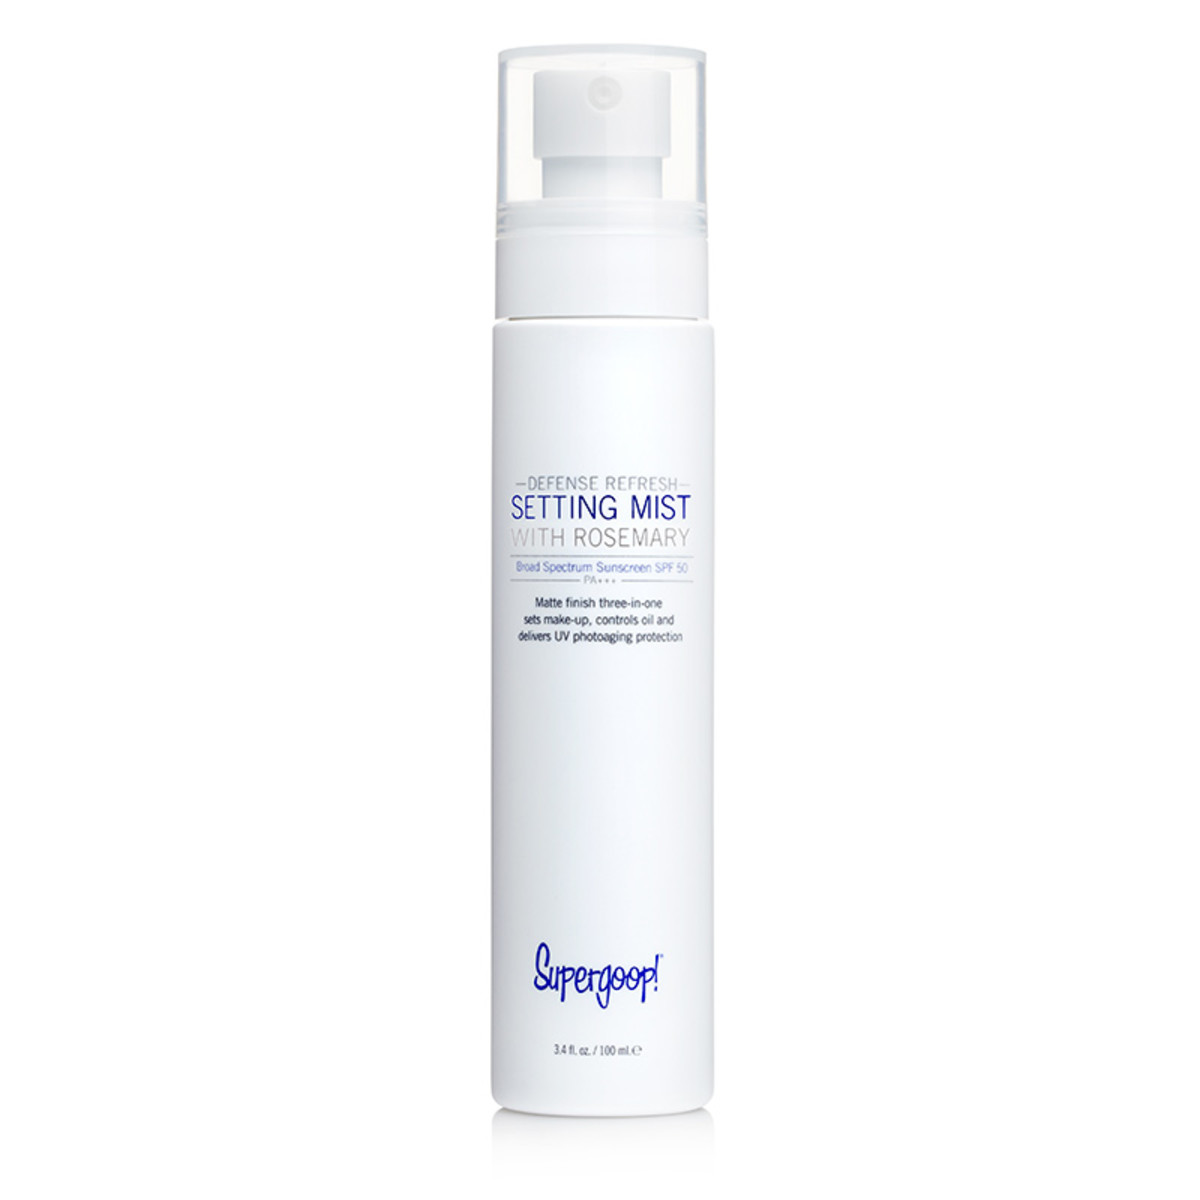 Supergoop Defense Refresh Setting Mist SPF 50, $28, available here. Photo: Courtesy of Supergoop